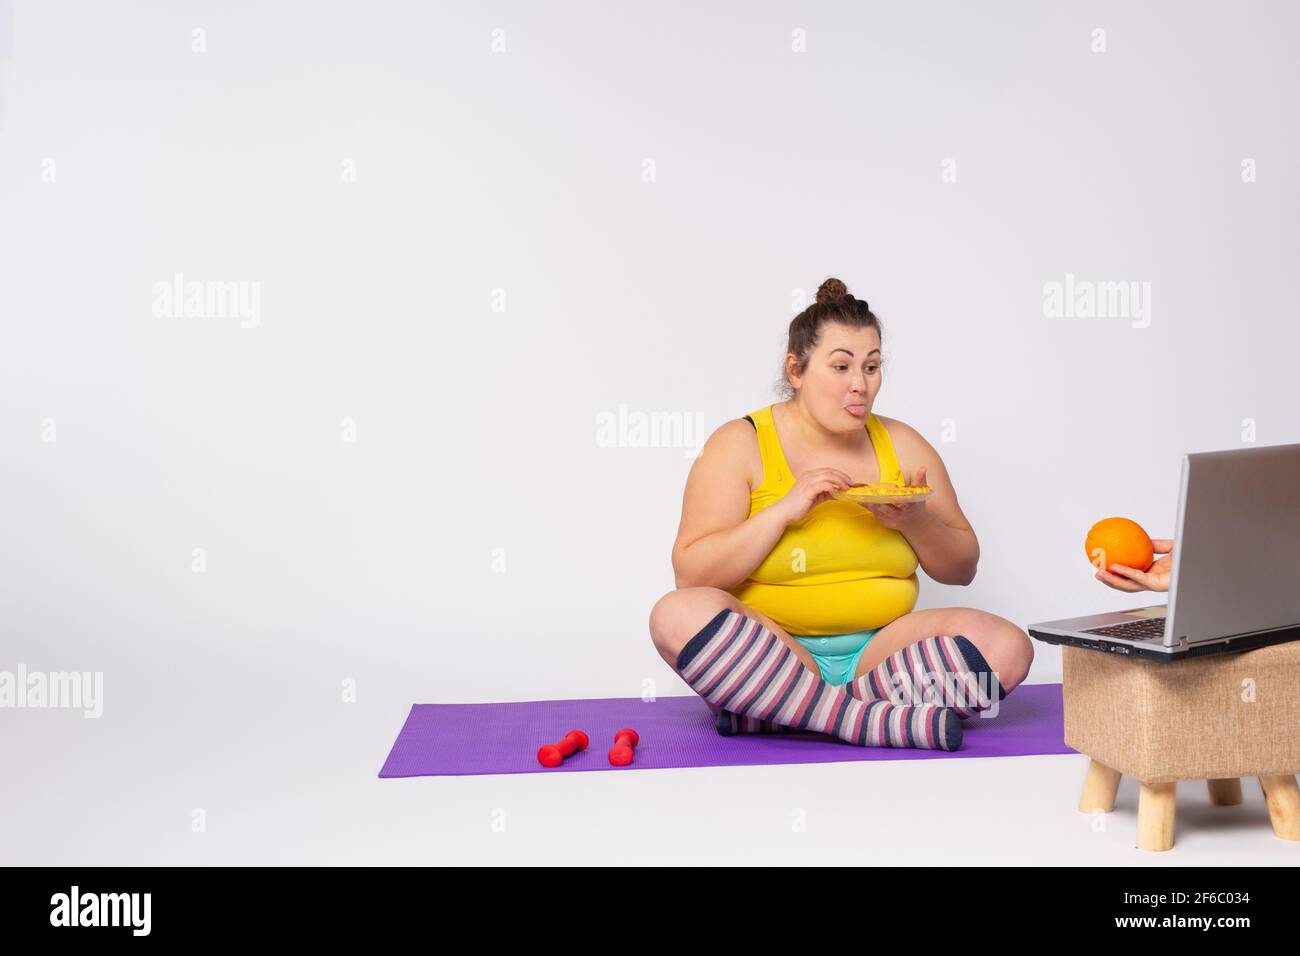 Young fat caucasian woman bending over a sports rug pointing her tongue at the laptop with hand holding orange fruit, eating sweets. A chubby girl Stock Photo